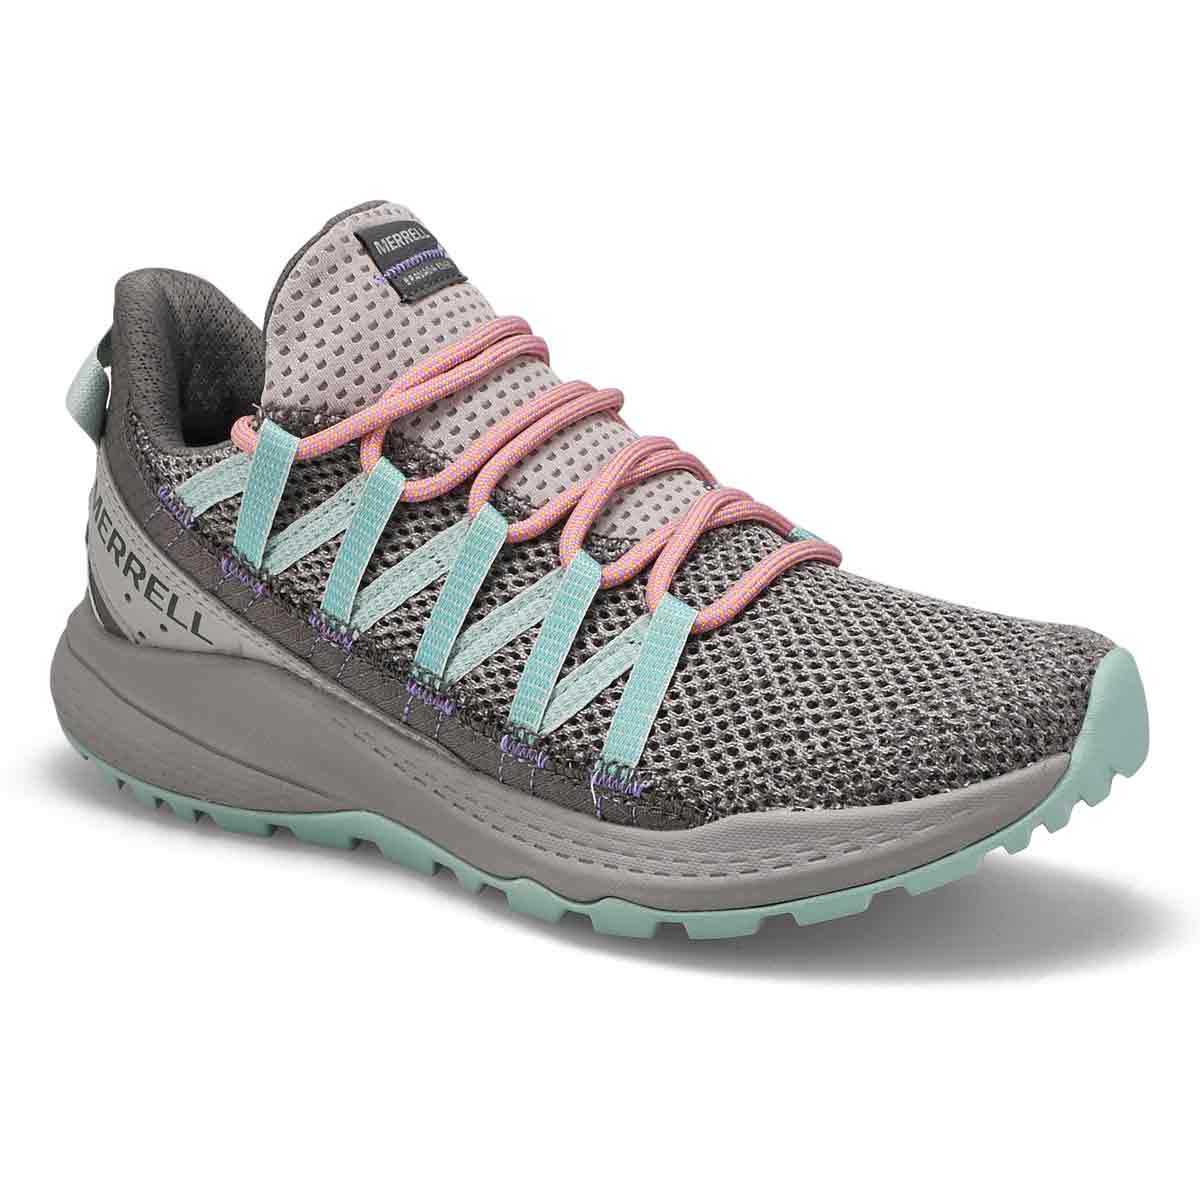 Merrell Bravada Shoes - Explore Performance and Comfort at Sporting Life